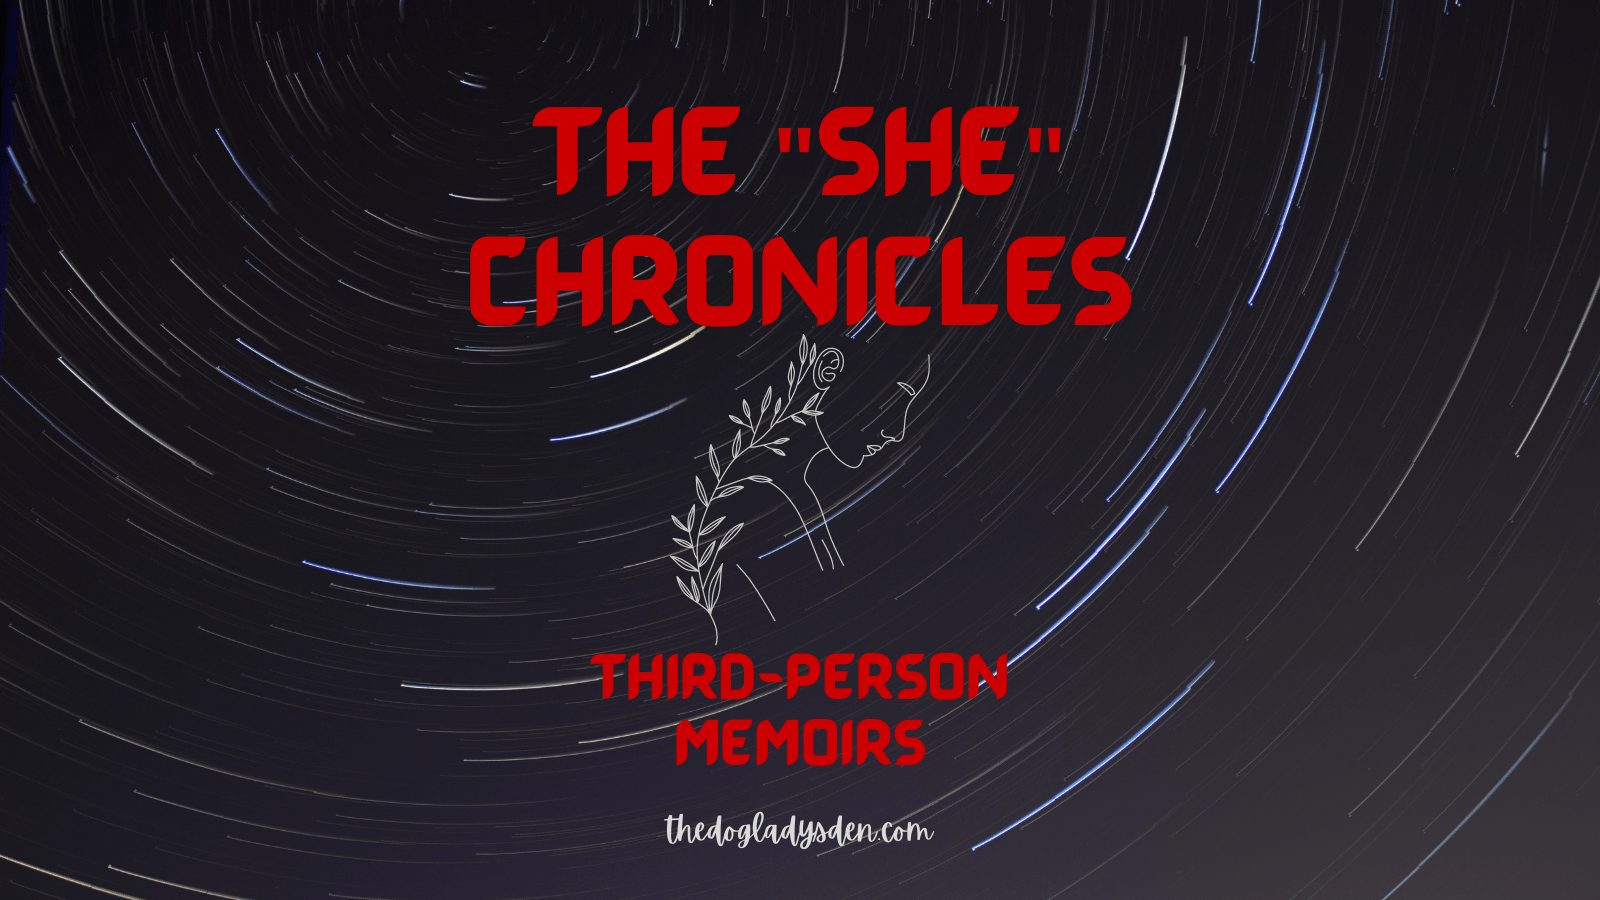 The SHE Chronicles